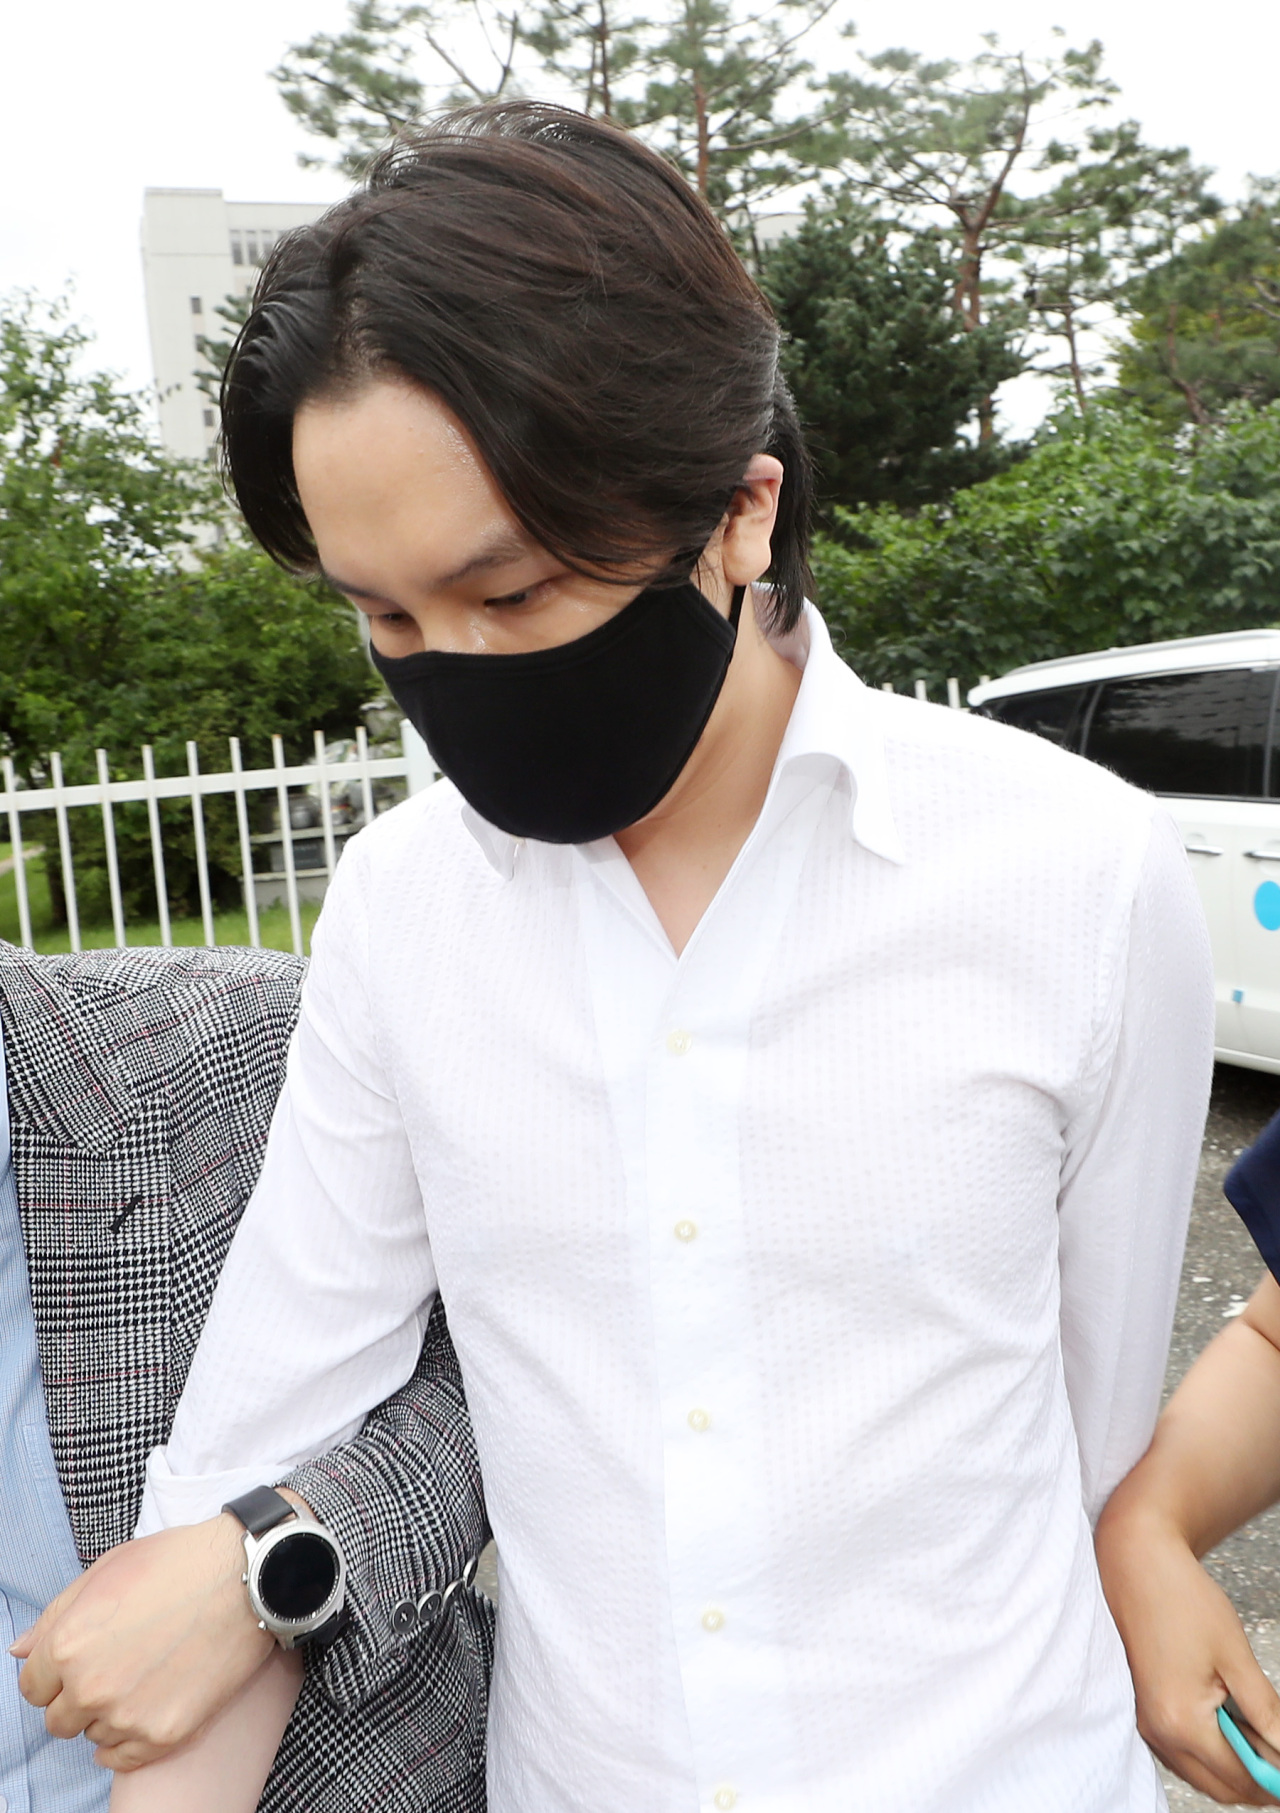 Choi, grandson of SK Group founder Choi Jong-gun, photographed leaving detention center Friday. (Yonhap)